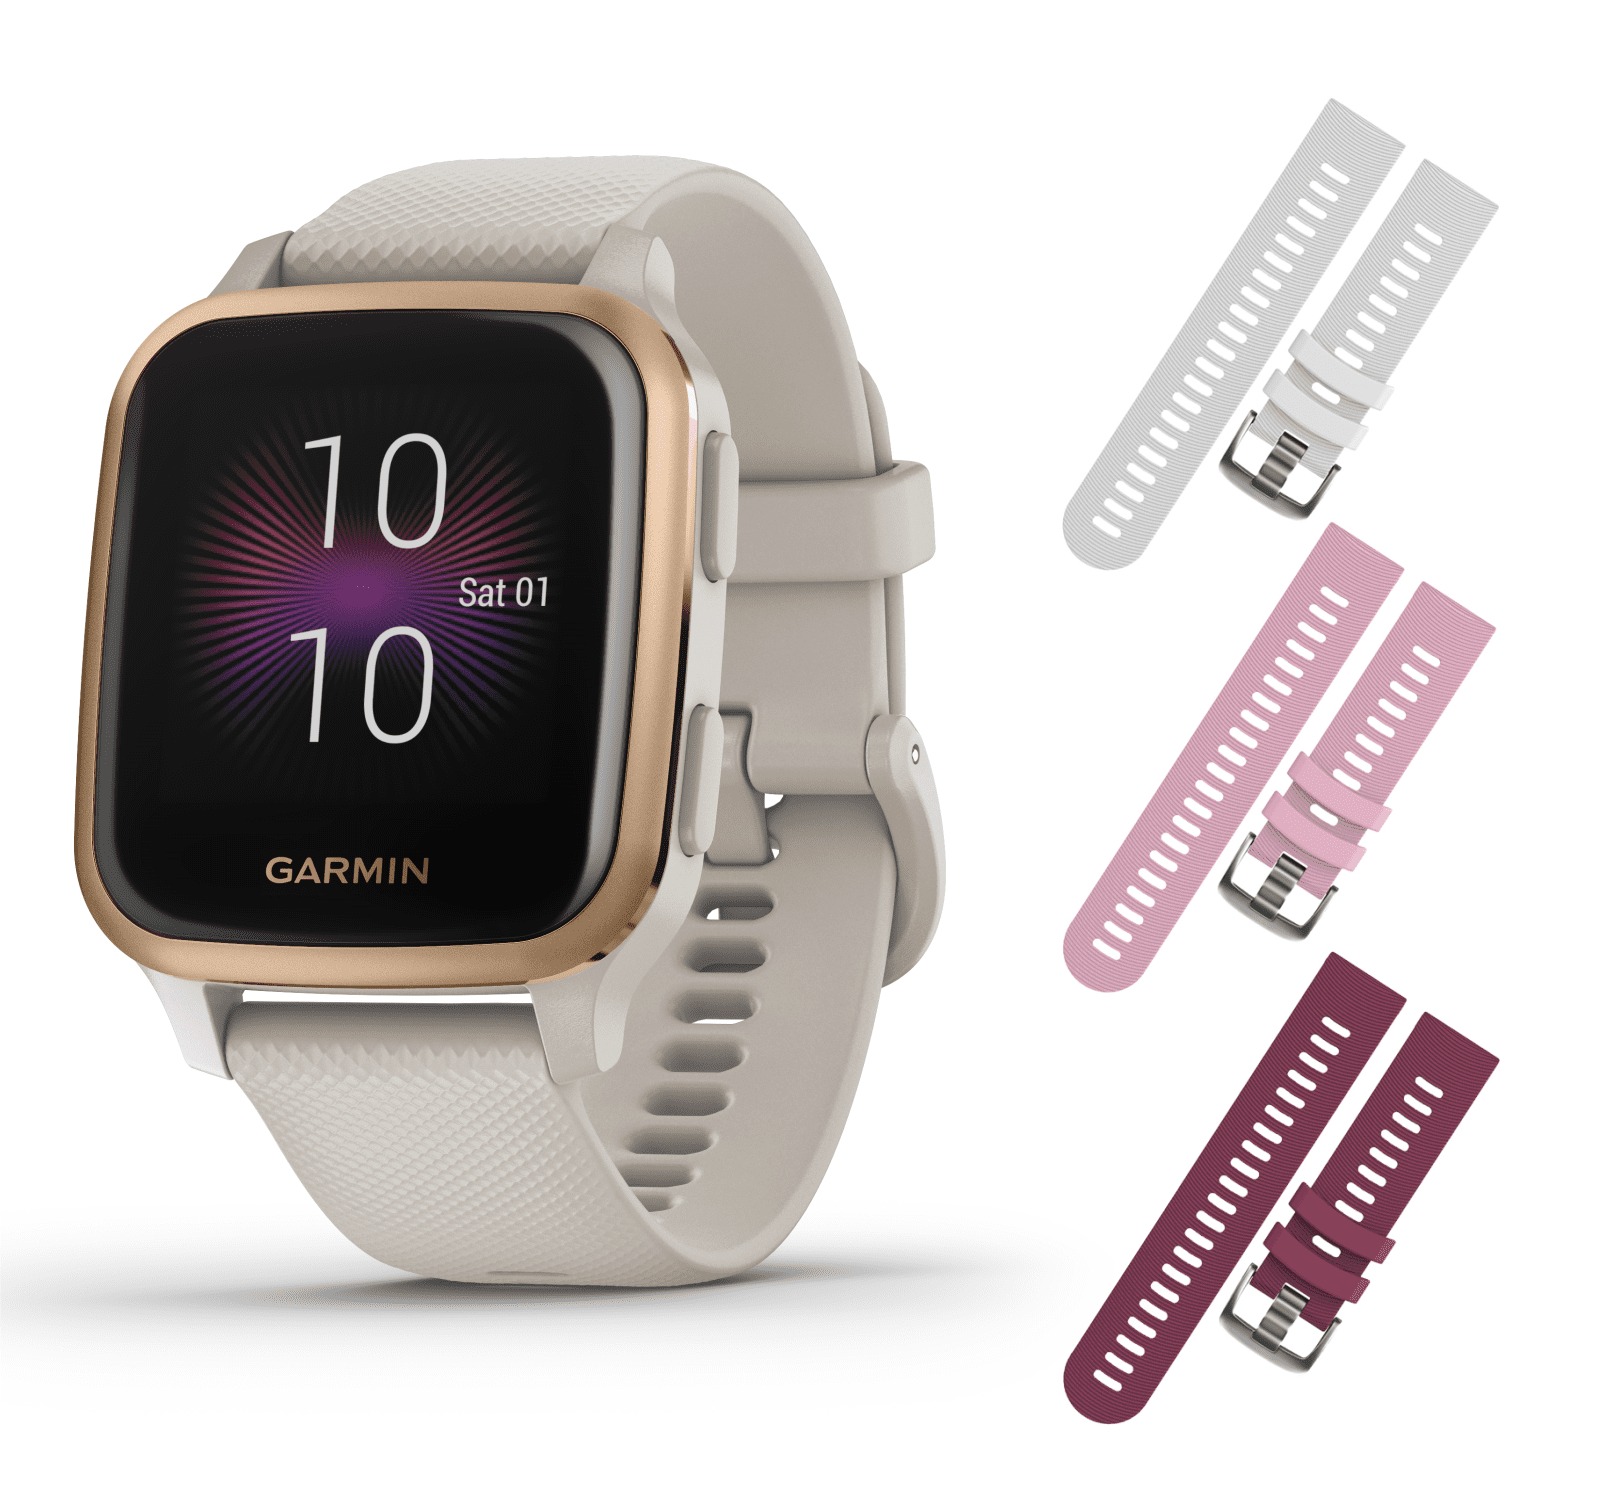 Garmin Venu Sq Music GPS Fitness Smartwatch and Included Wearable4U 3 Straps Bundle White/Pink/Berry, Navy/Light Gold 010-02426-02 